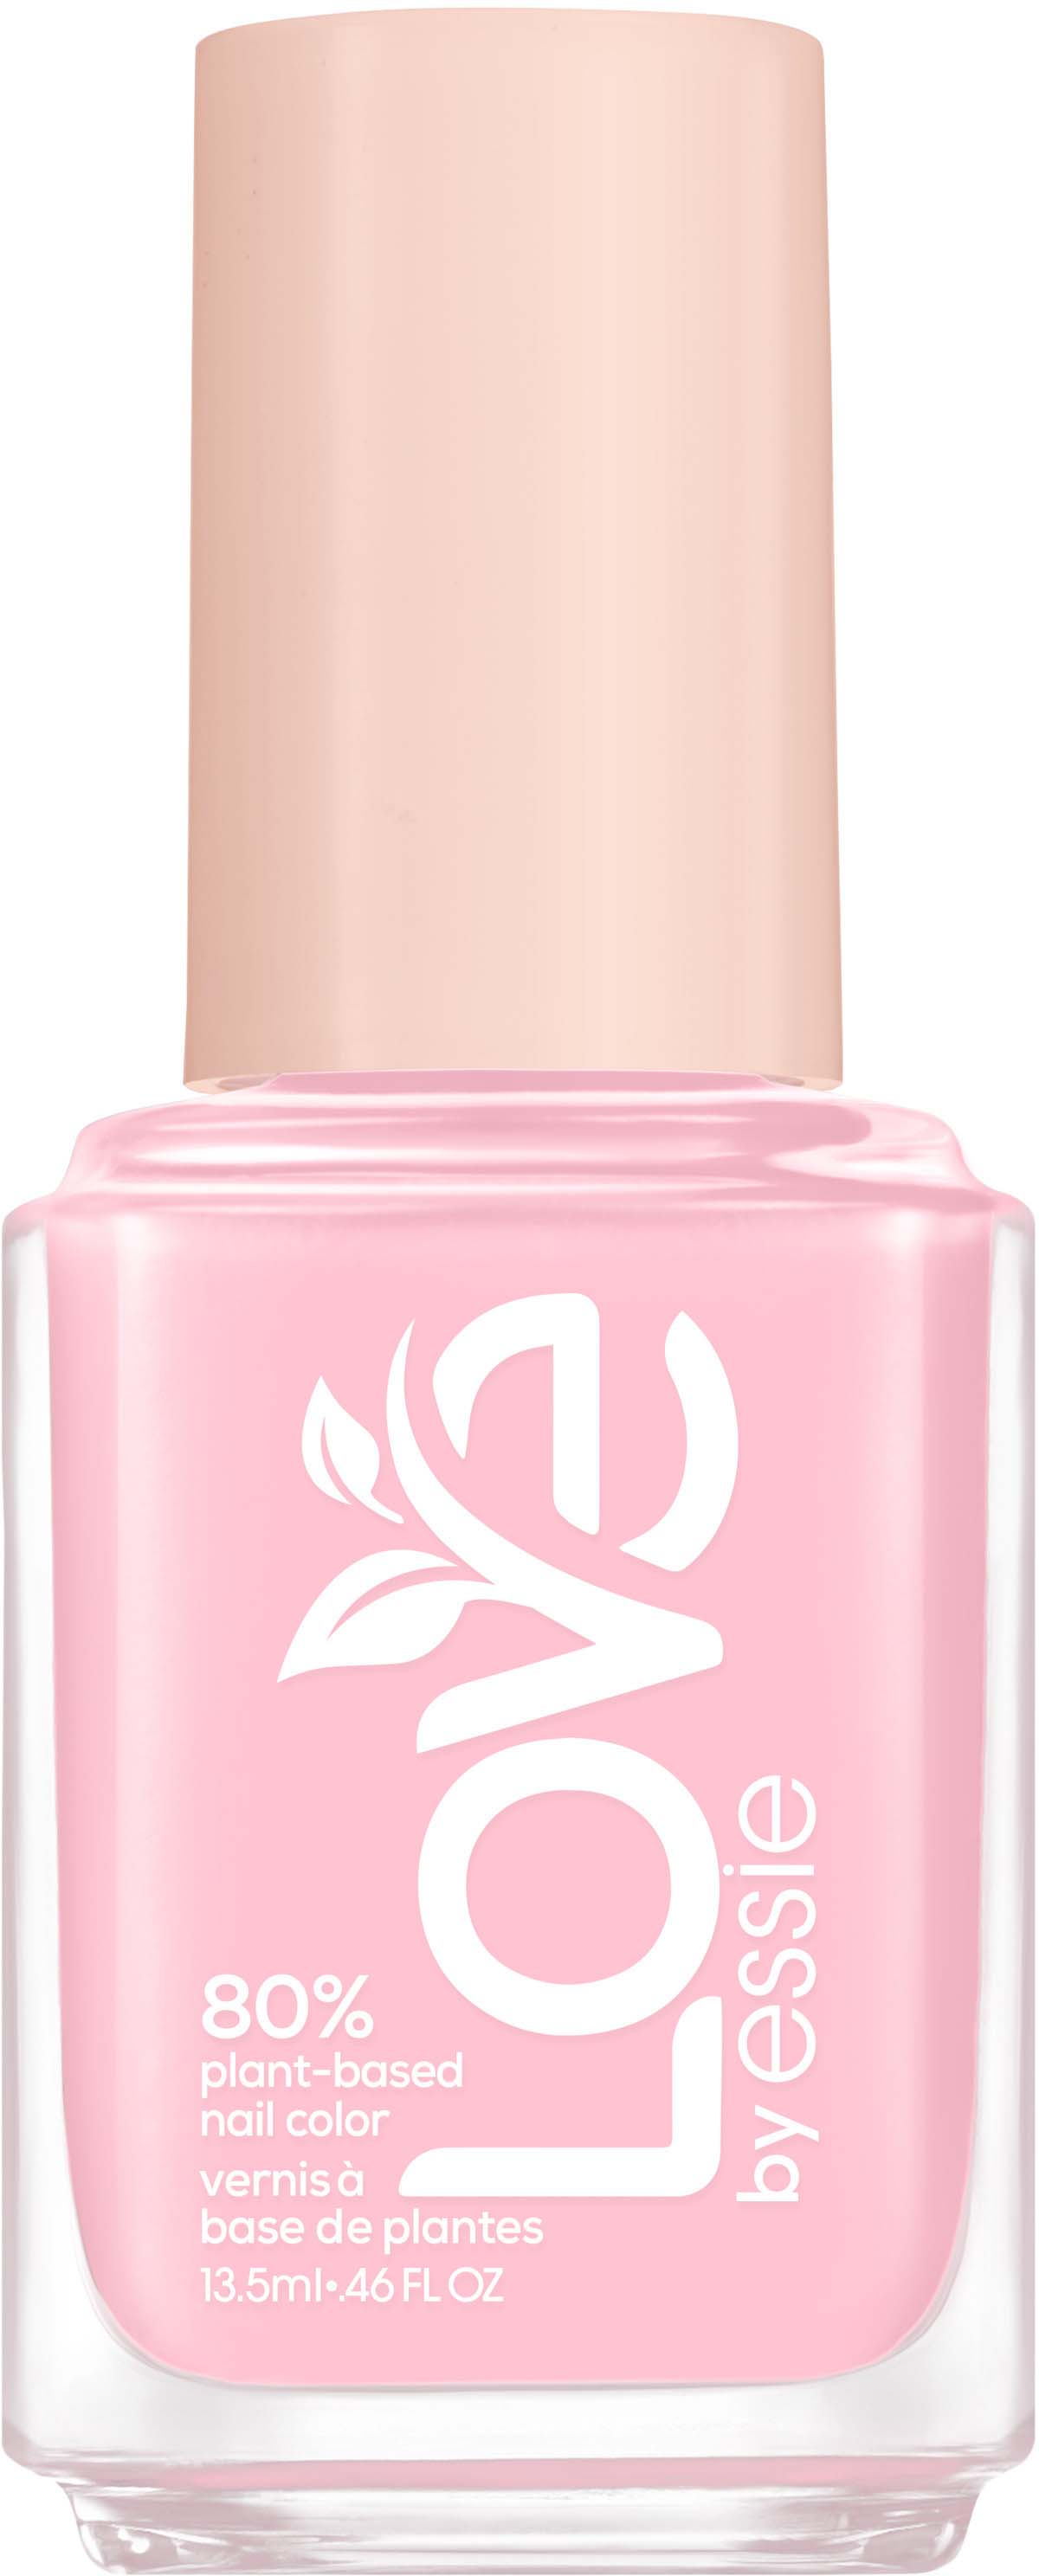 Essie LOVE Move 80% 130 Plant-based Essie Nail Make The by Color